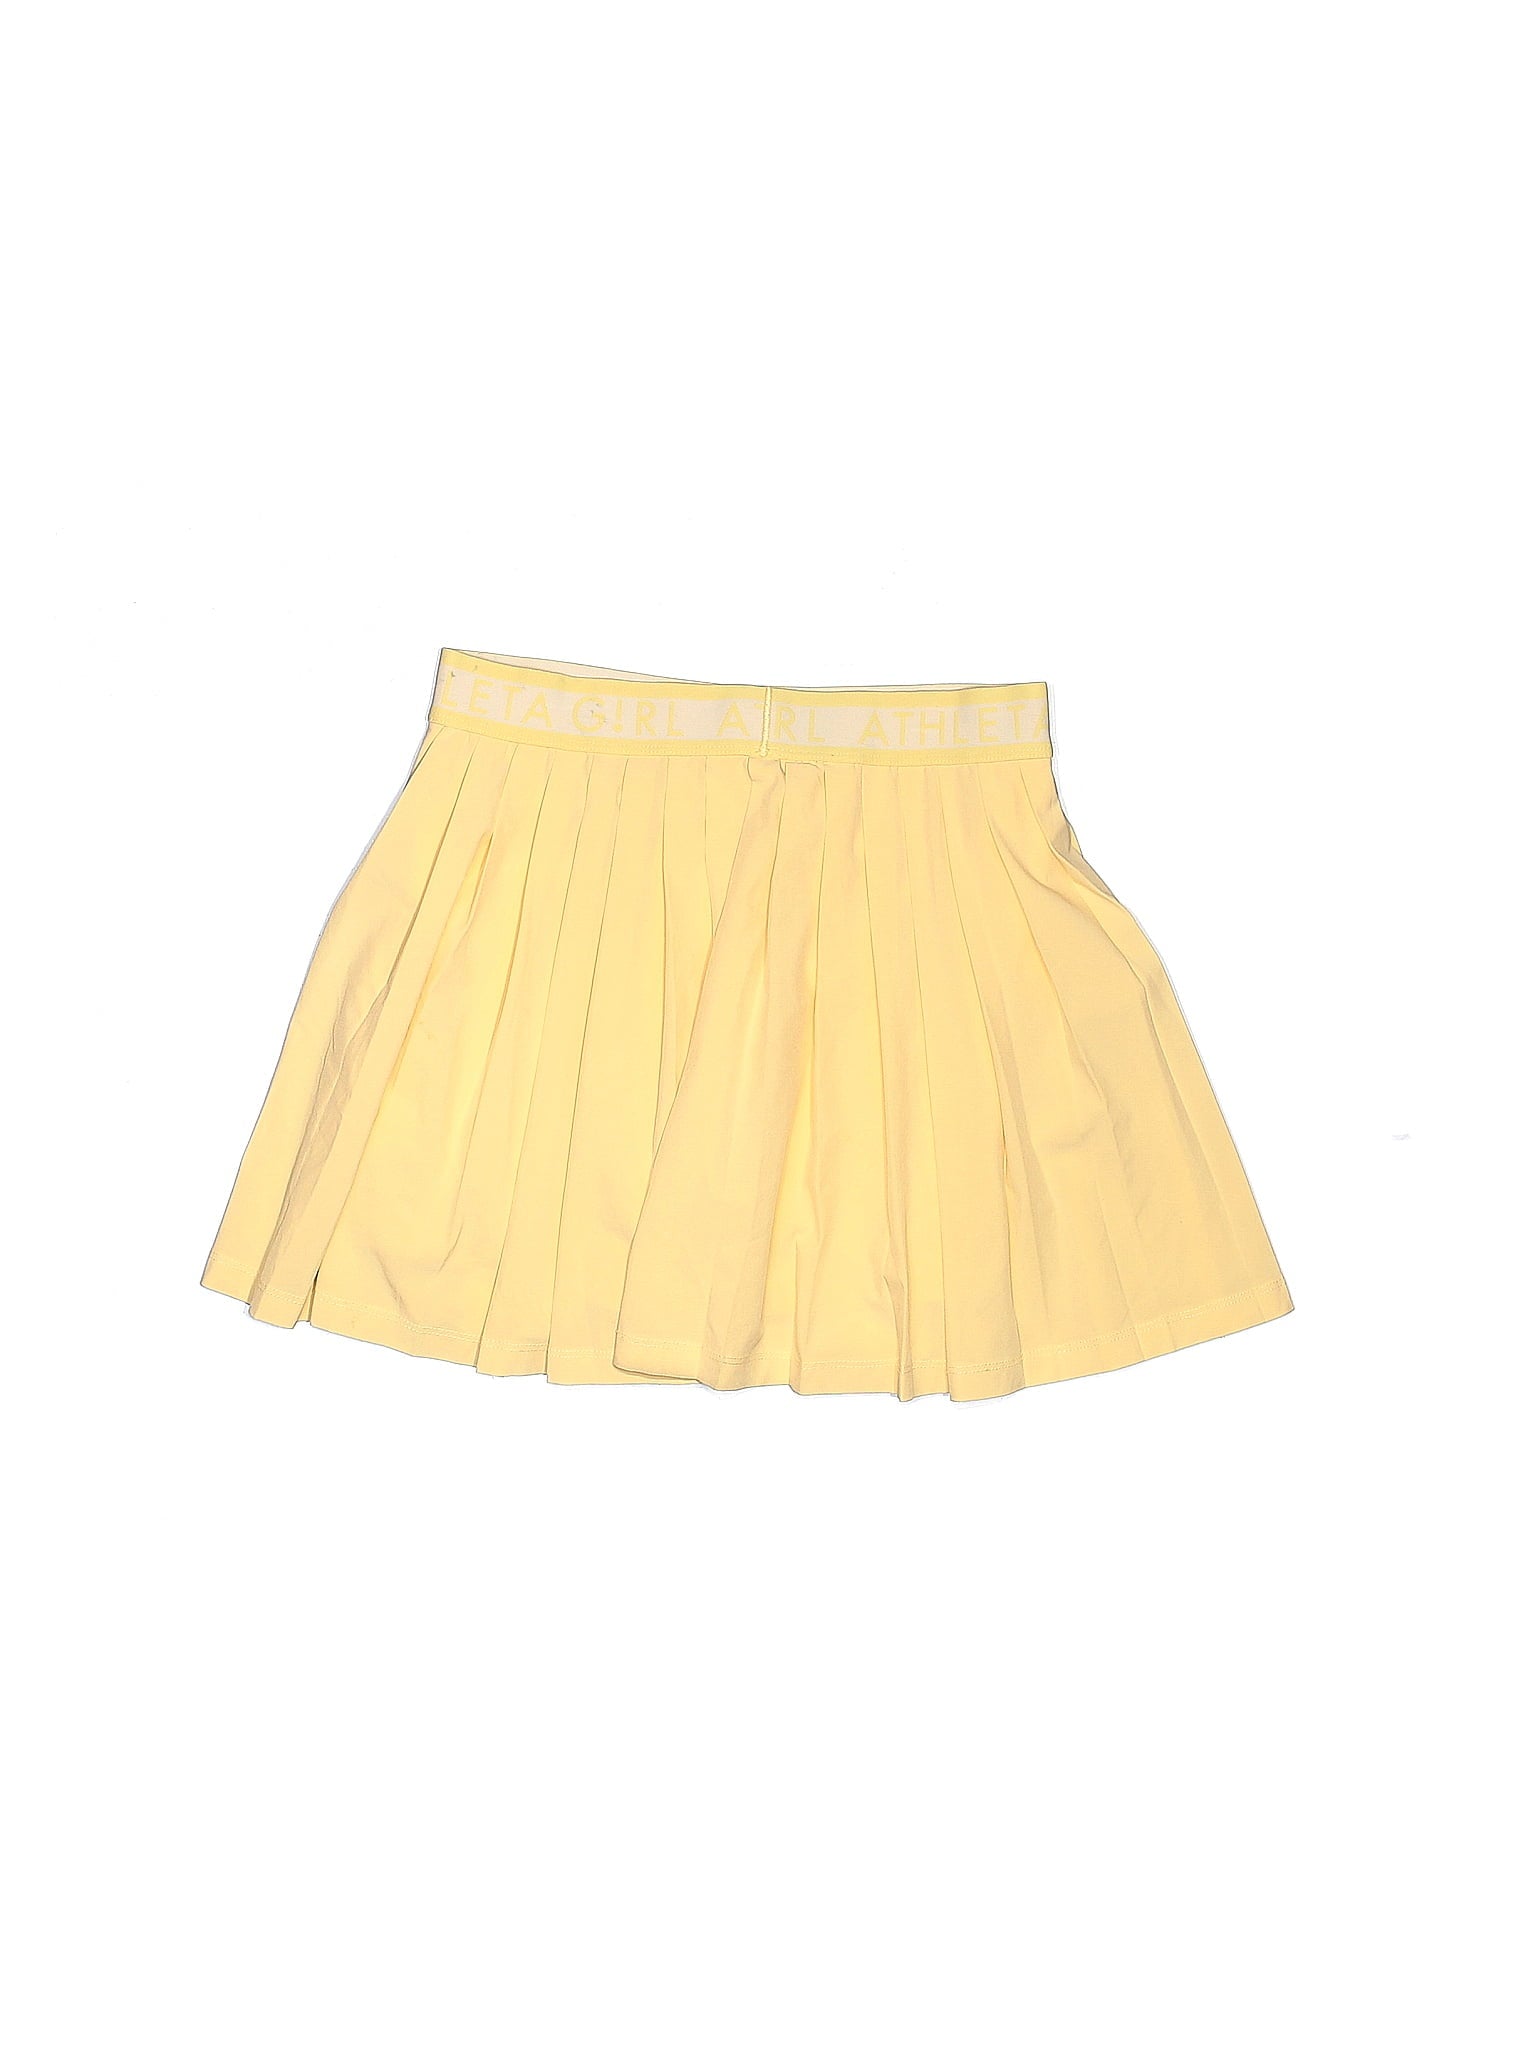 Active Skort size - X-Large (Youth)